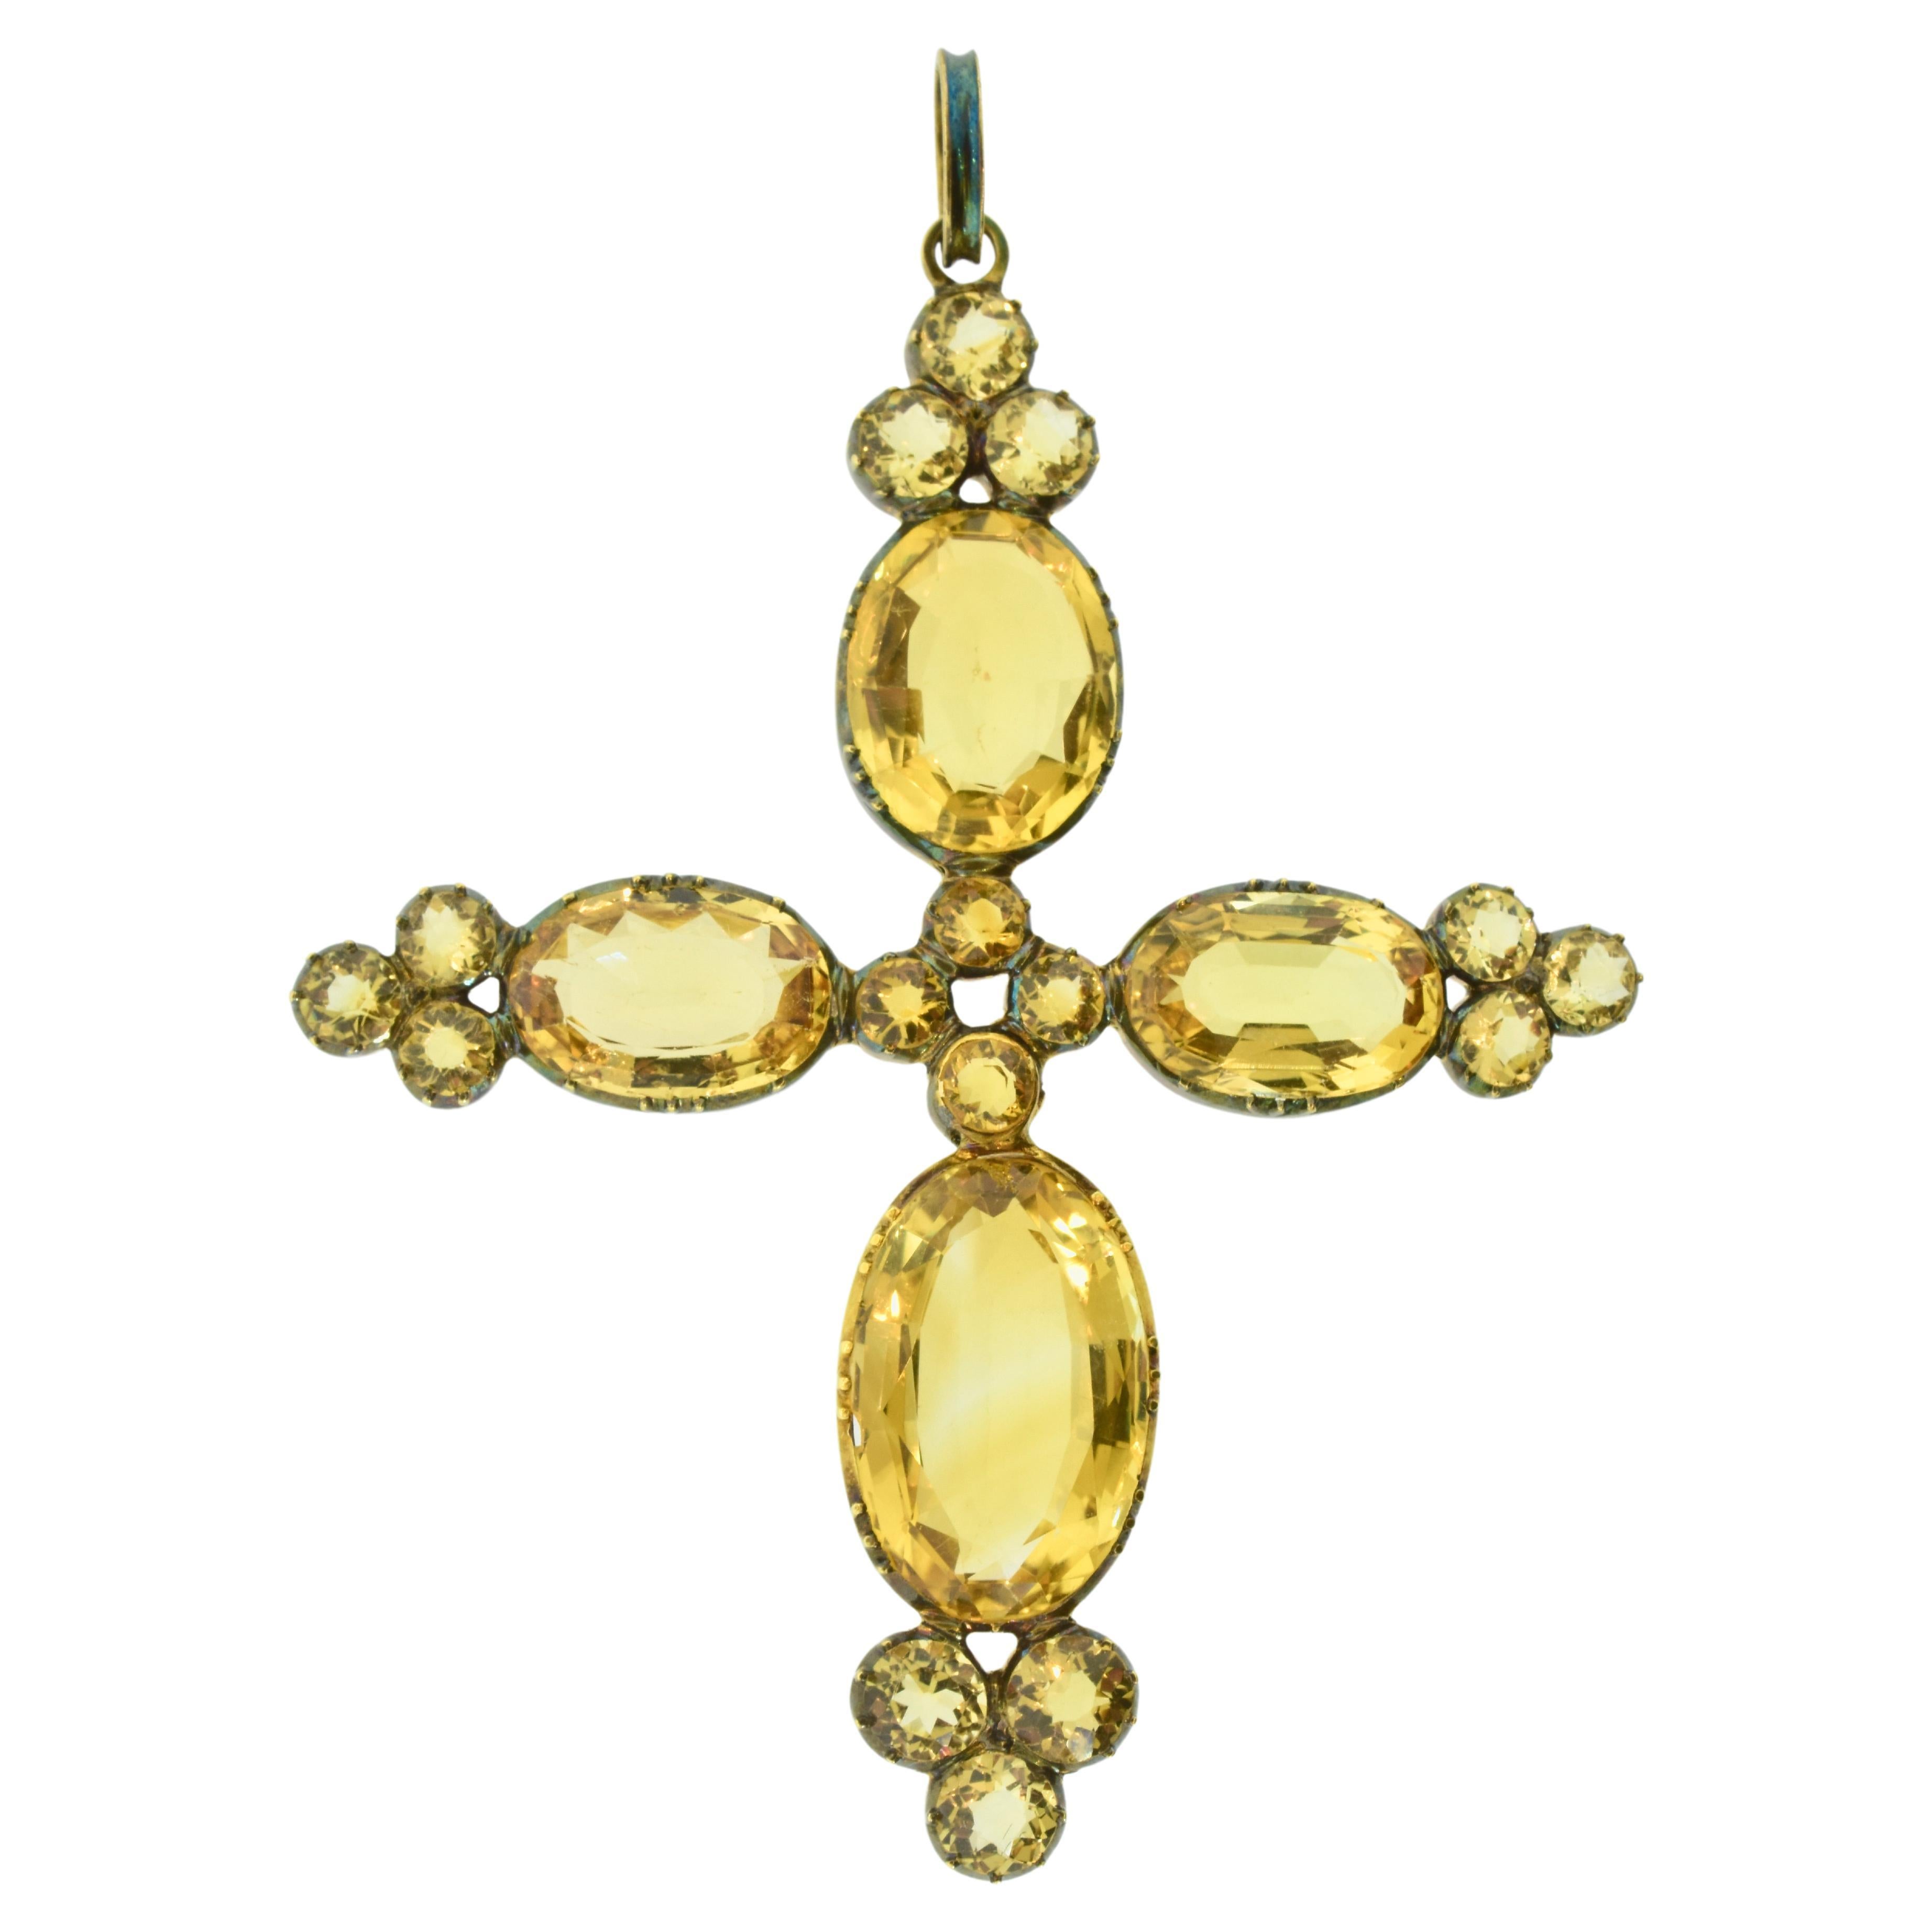 Antique cross early 19th Century cross of approximately 30 cts. natural lemon yellow Citrines. The larger oval cut stones have fancy pavilion facets which reflect the light well.  The 20 stones are both old mine cut in an oval shape, they are set